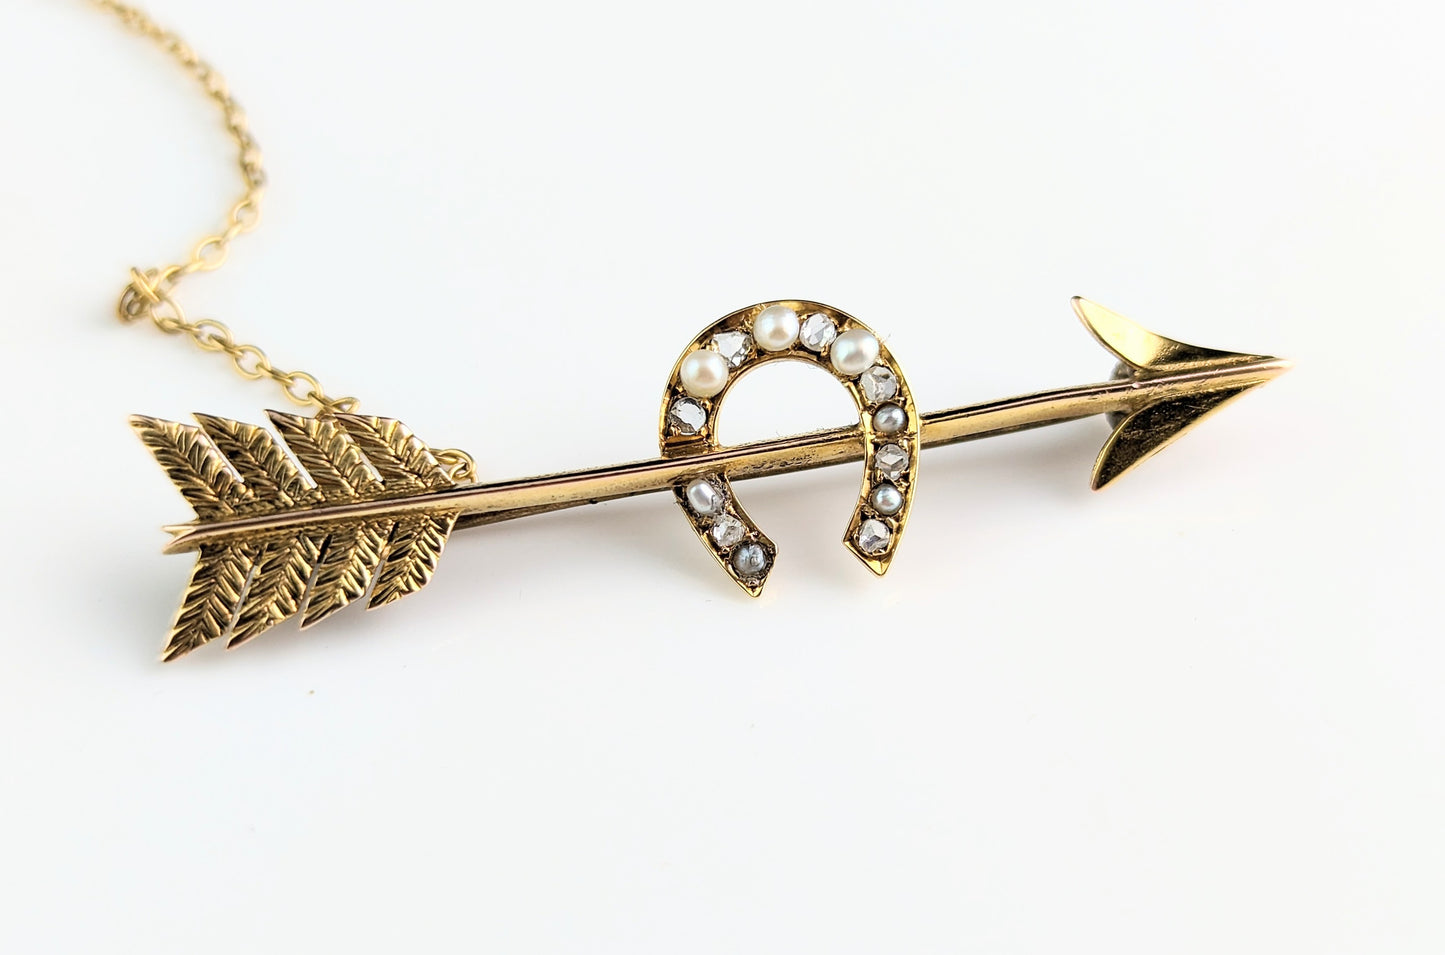 Antique 15ct gold Arrow and horseshoe brooch, Diamond and Pearl, Victorian